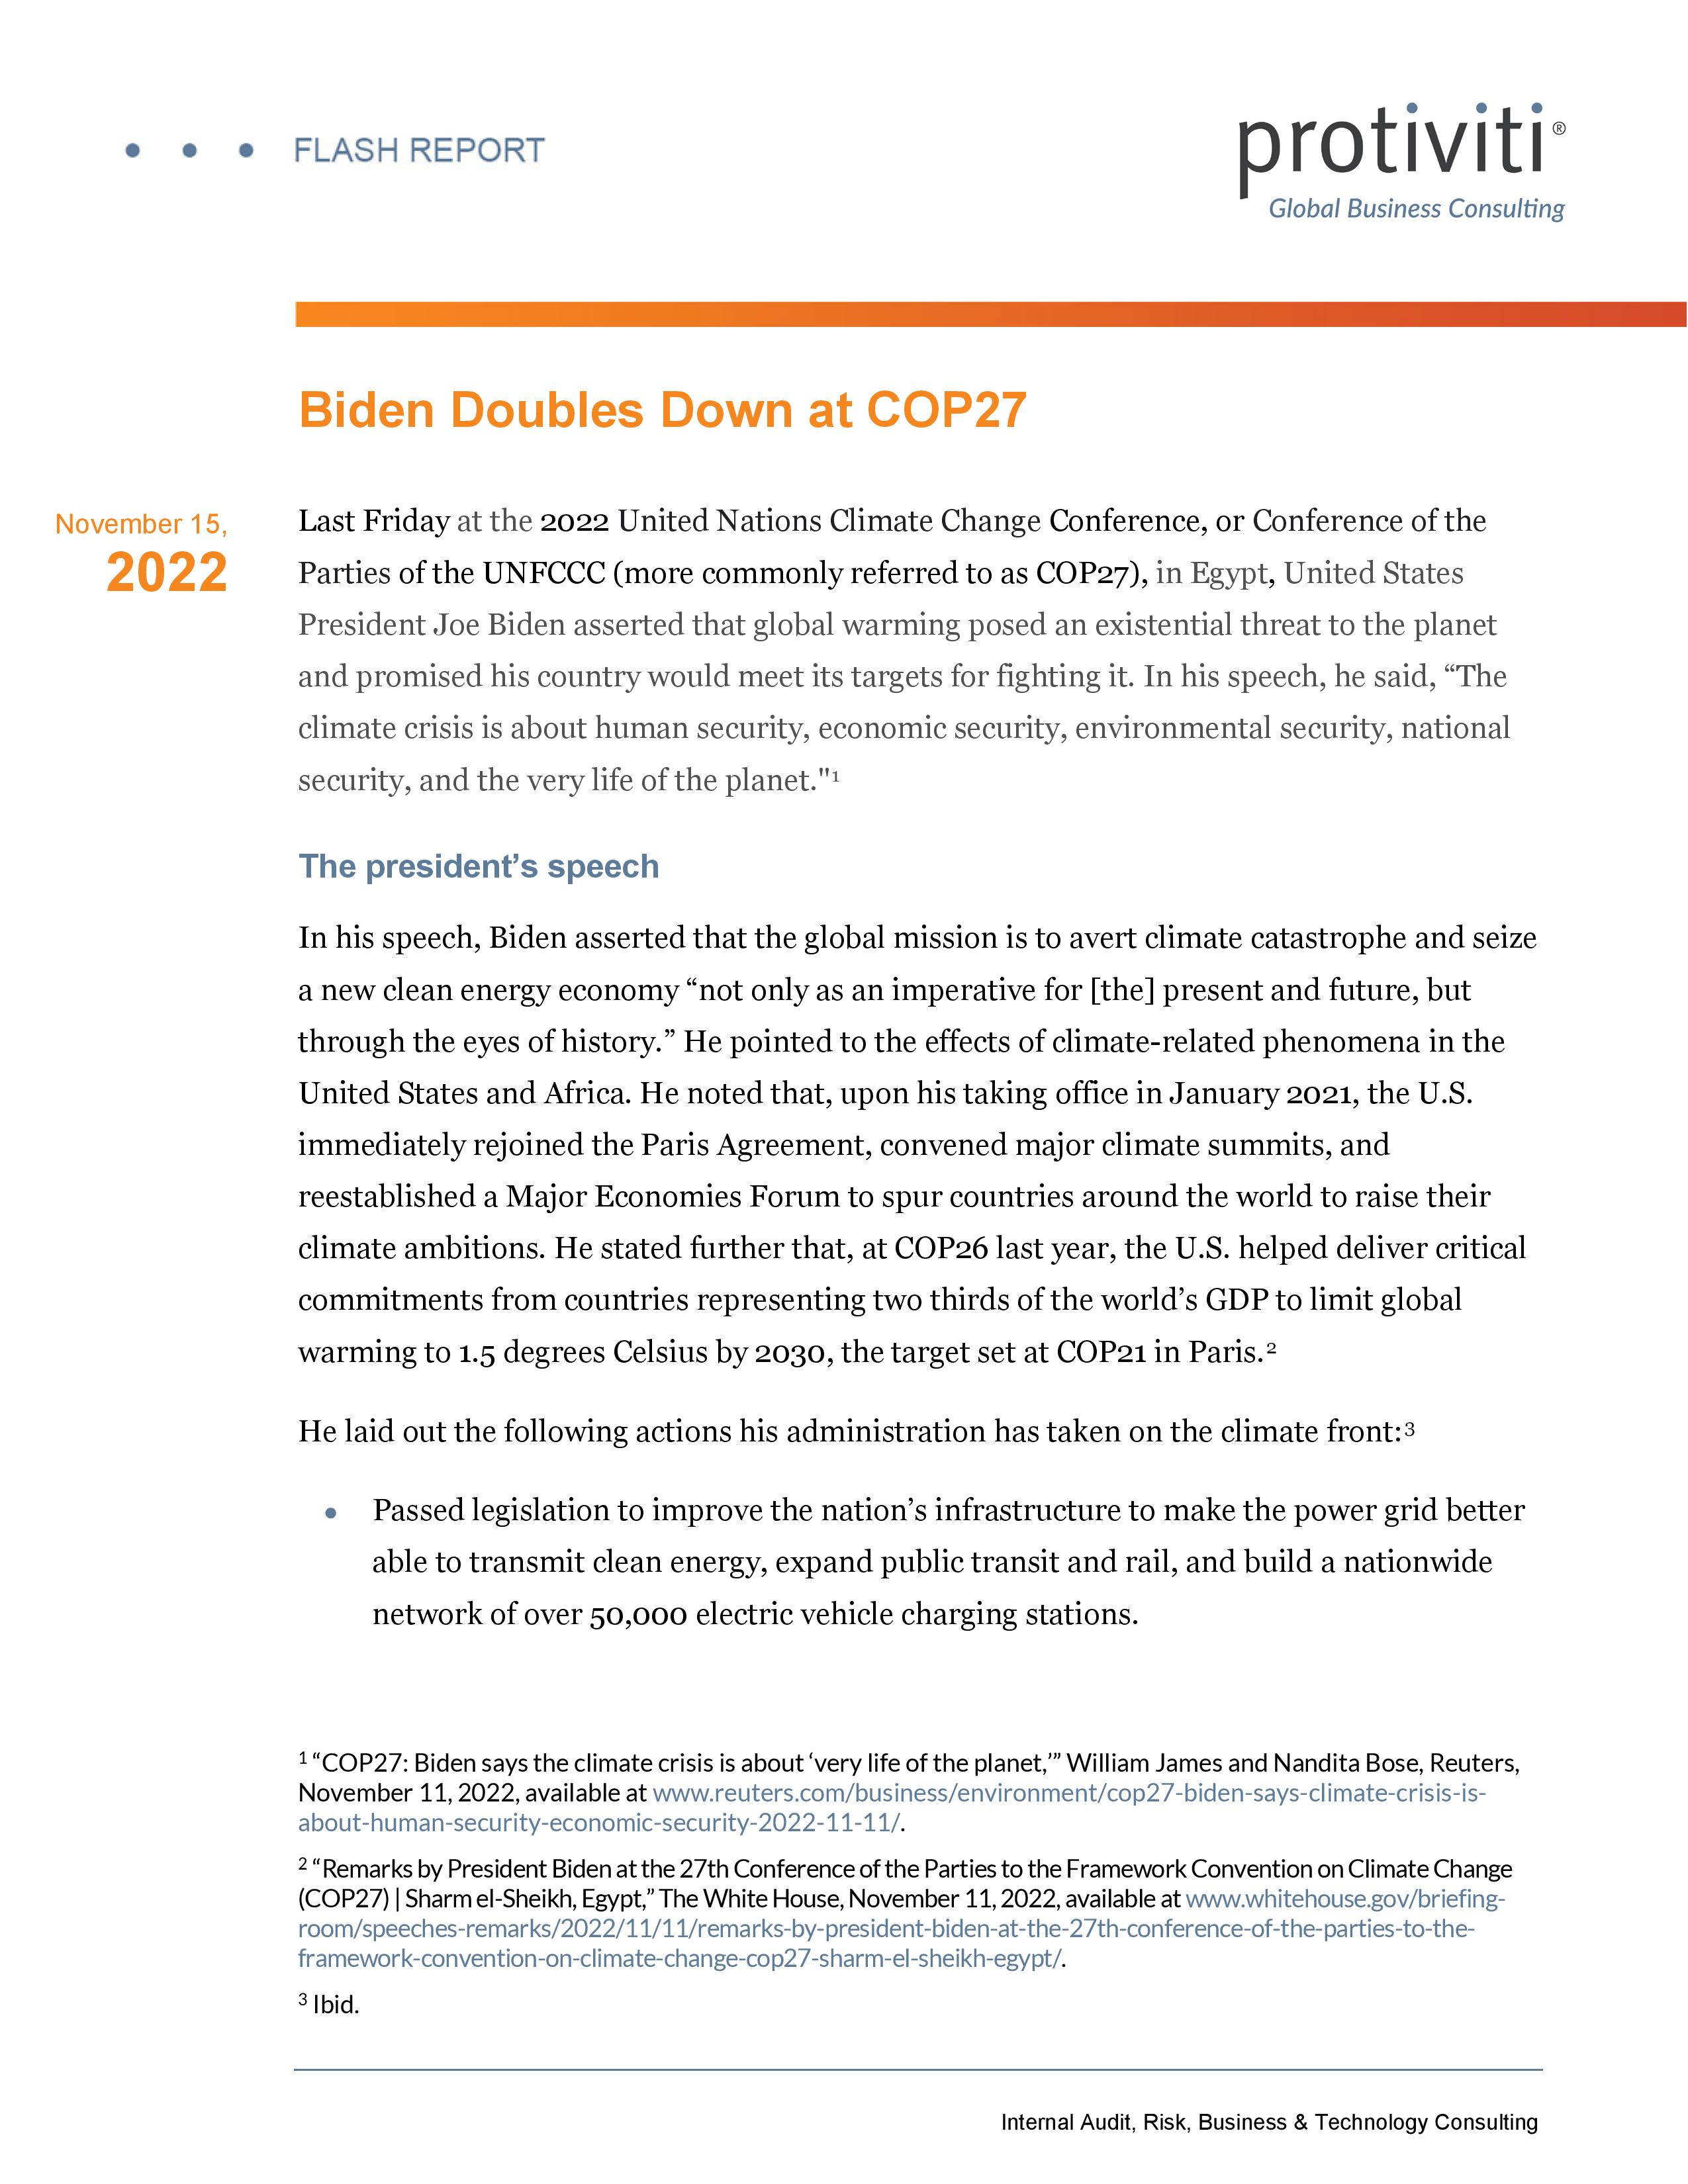 Screenshot of the first page of protiviti-flash-report-biden-doubles-down-at-cop27-111522